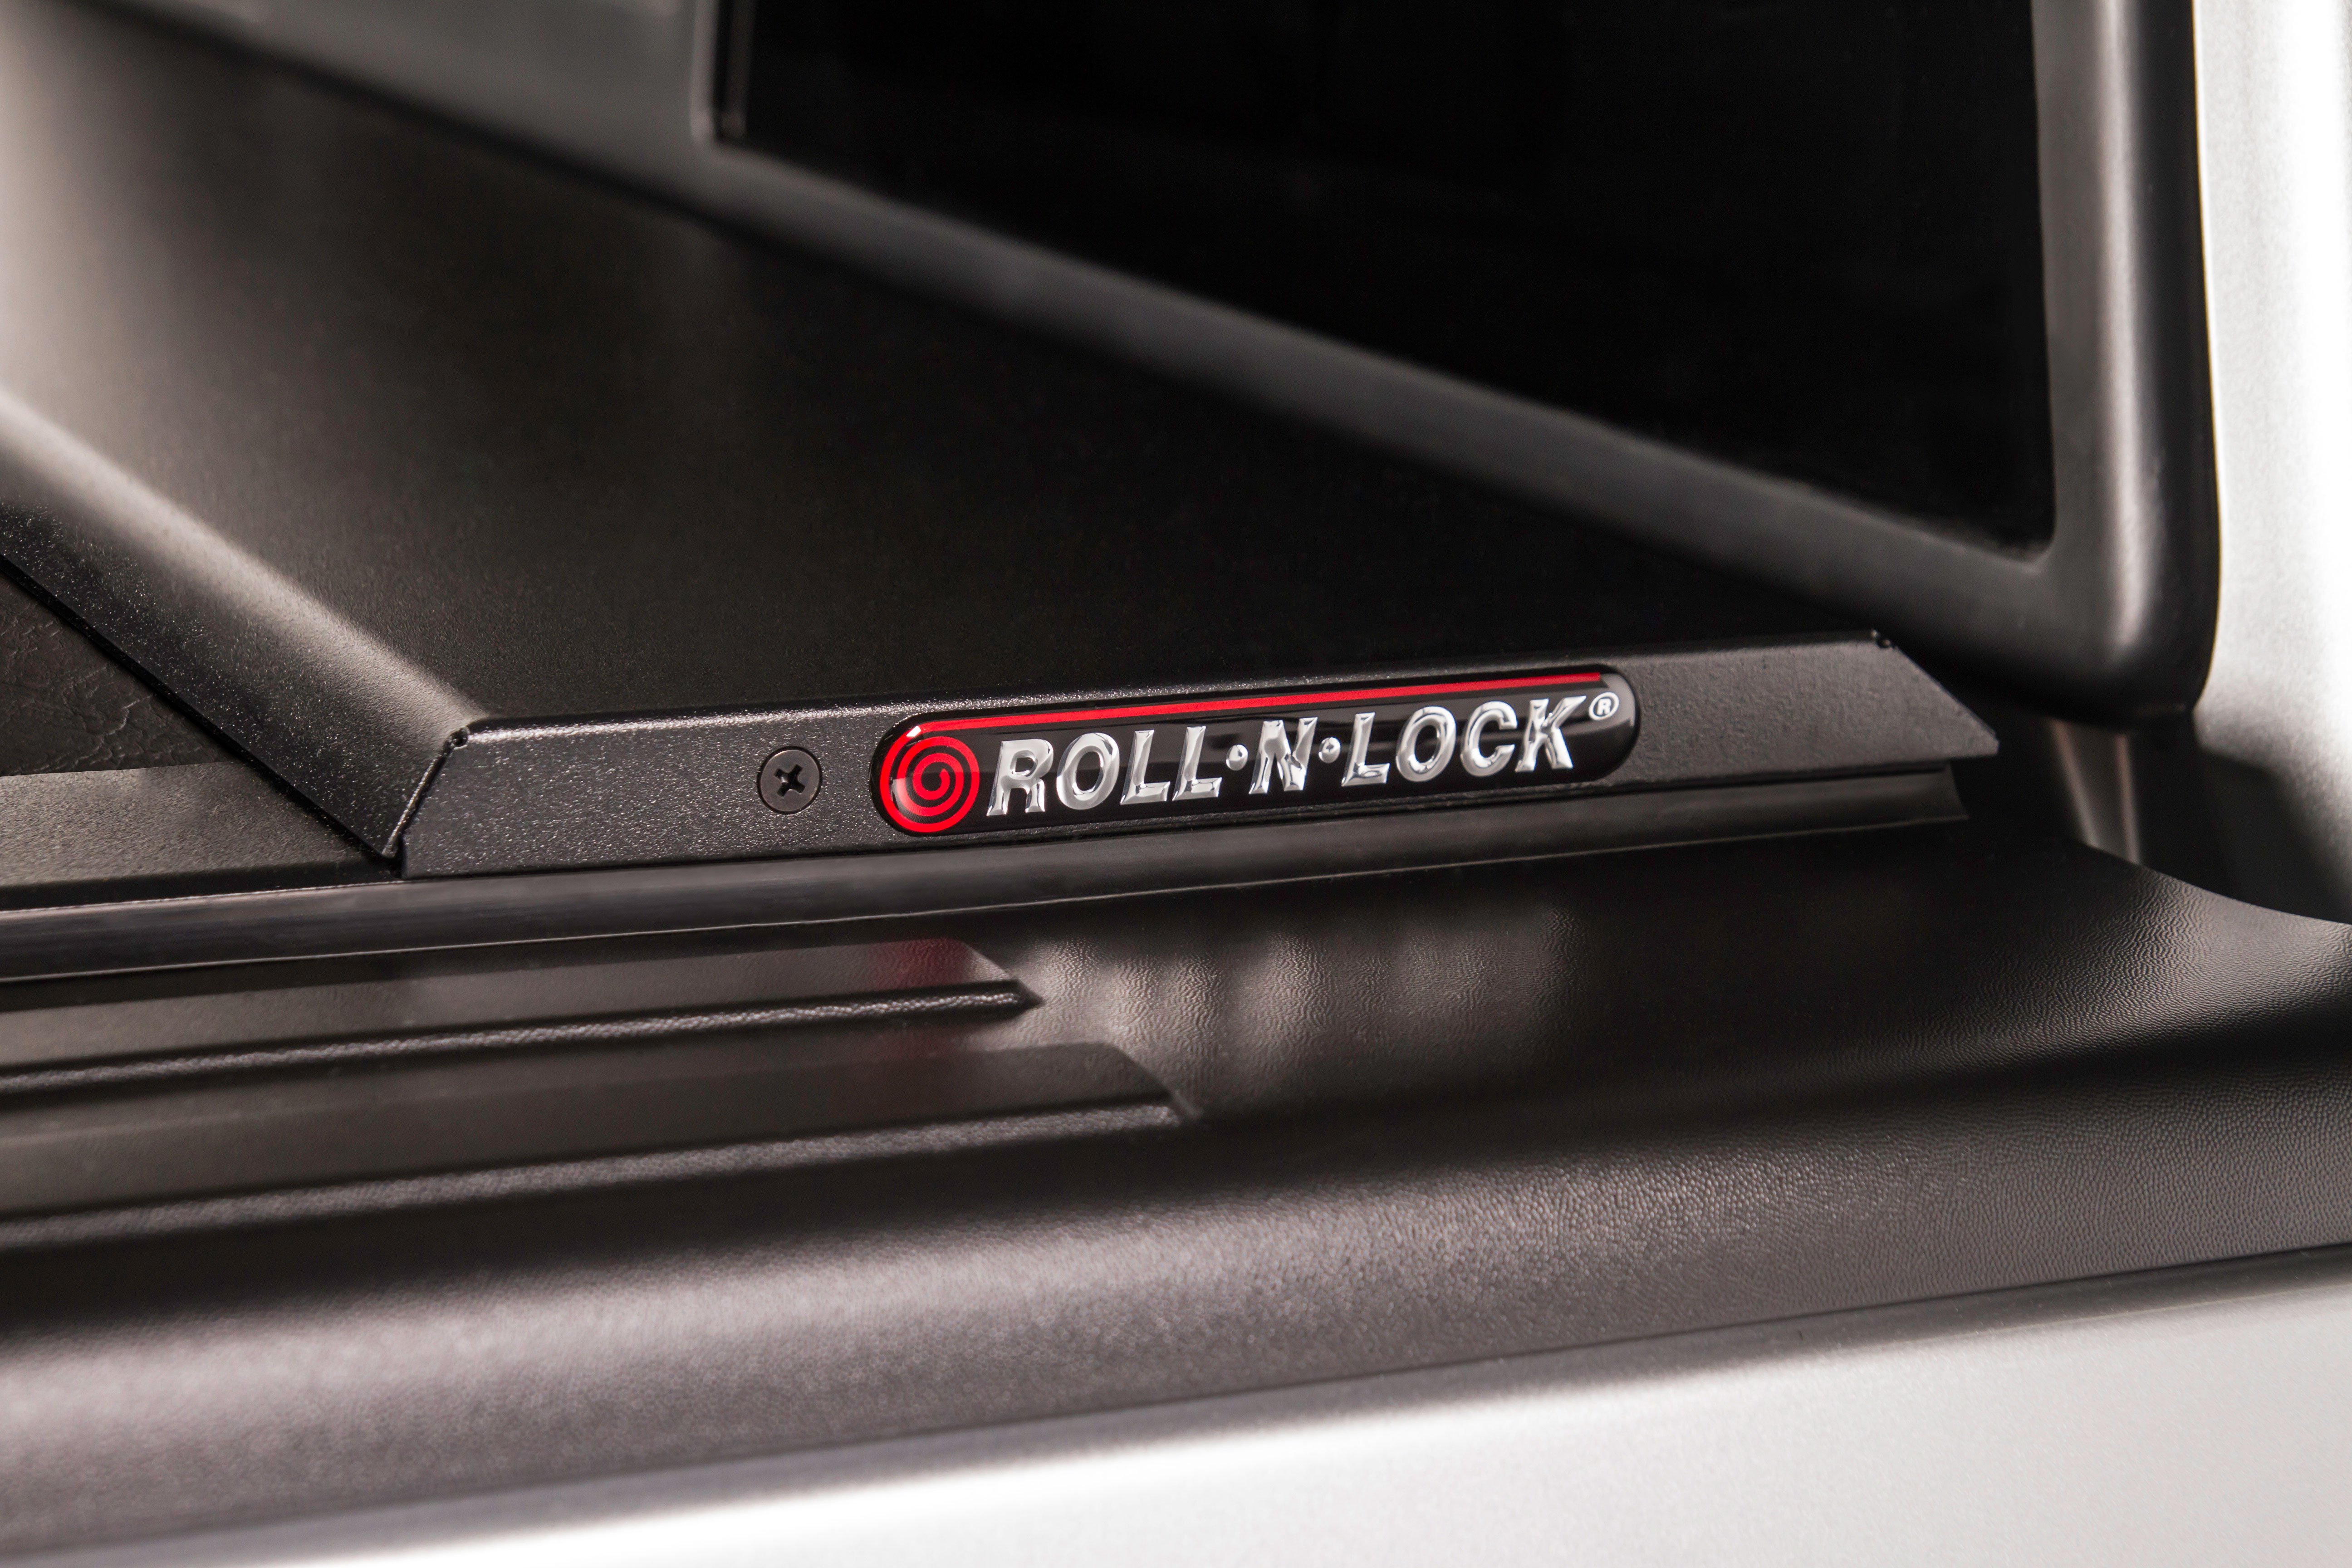 Roll n Lock has what you need to be safe out their